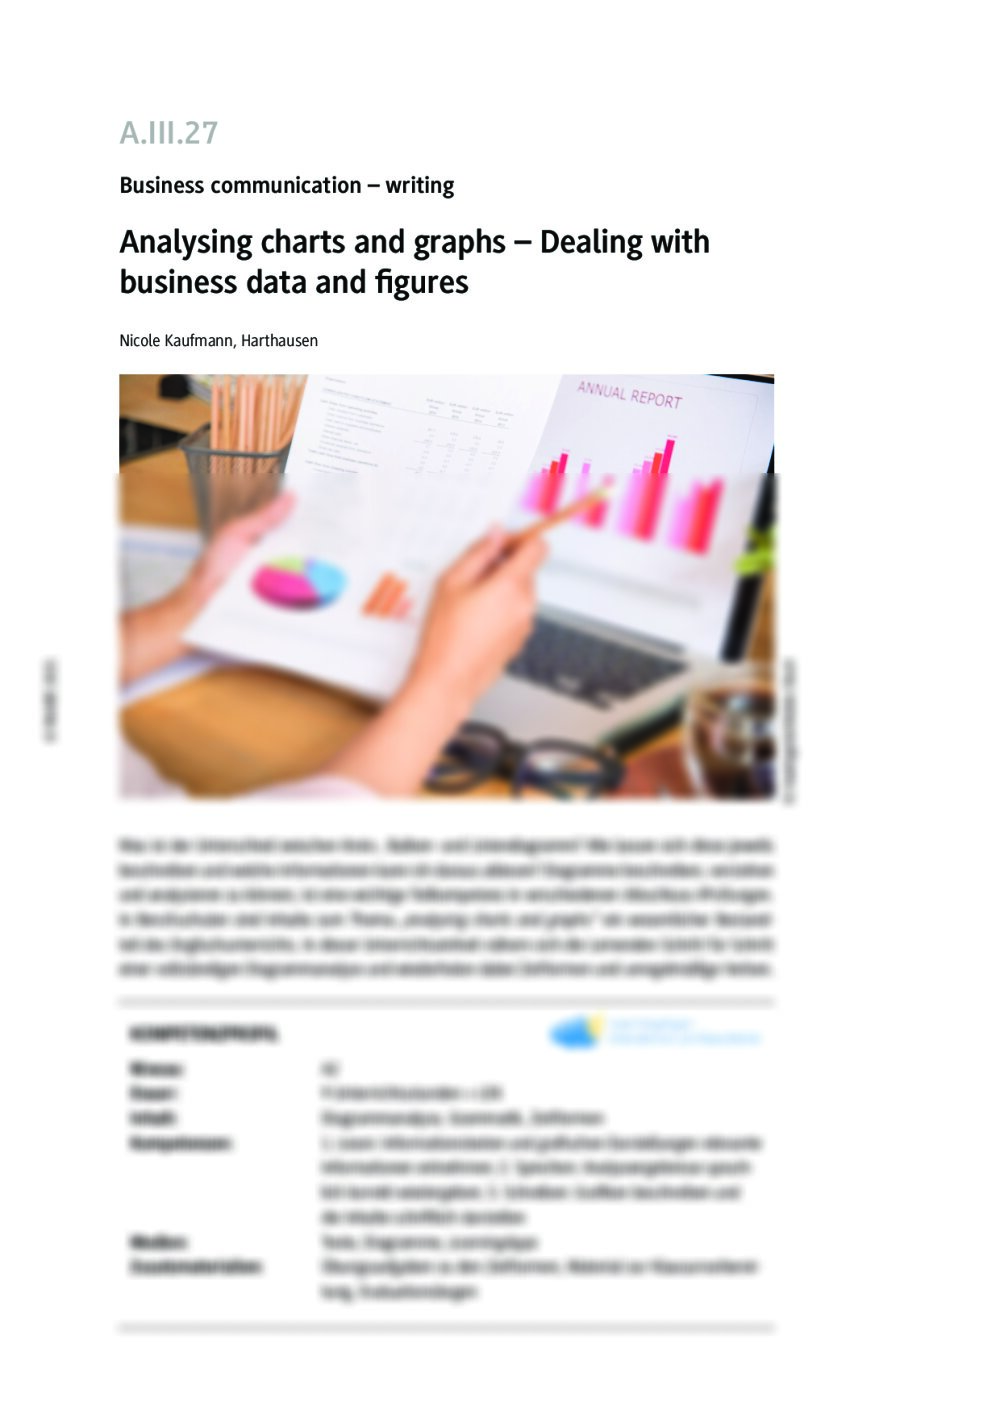 Analysing charts and graphs - Seite 1